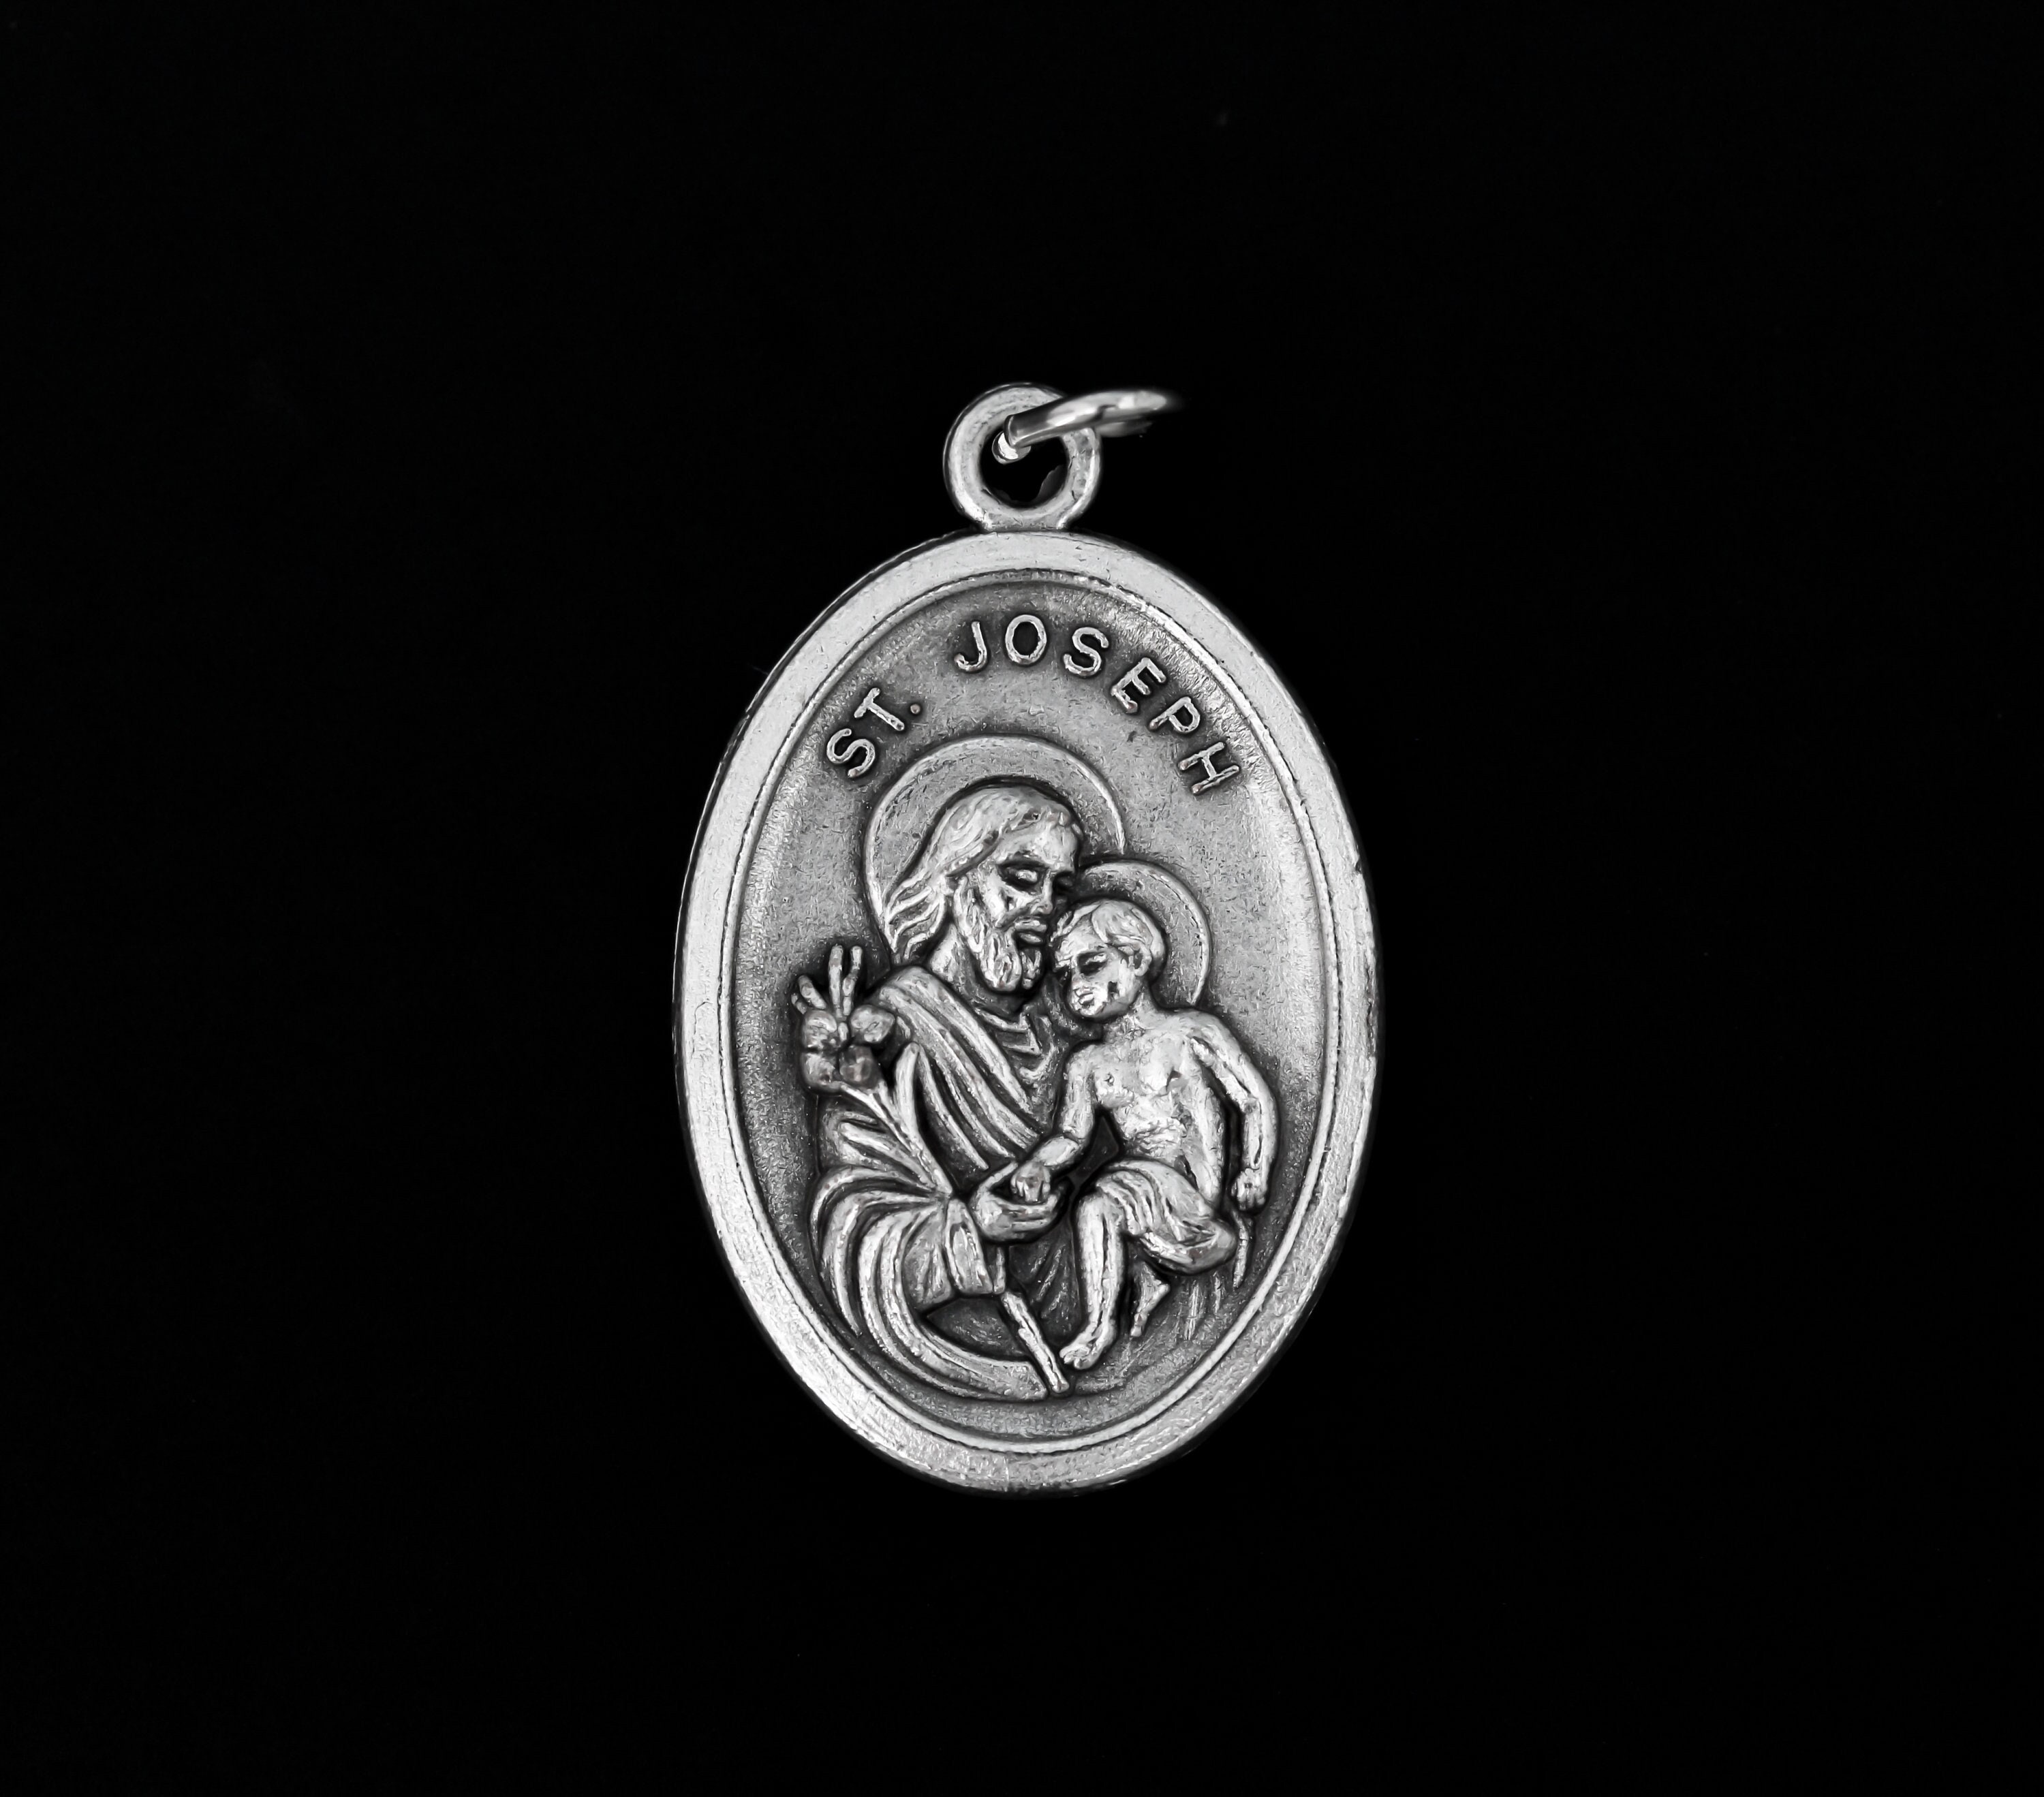  Pewter Saint John Vianney Medal with Laminated Holy